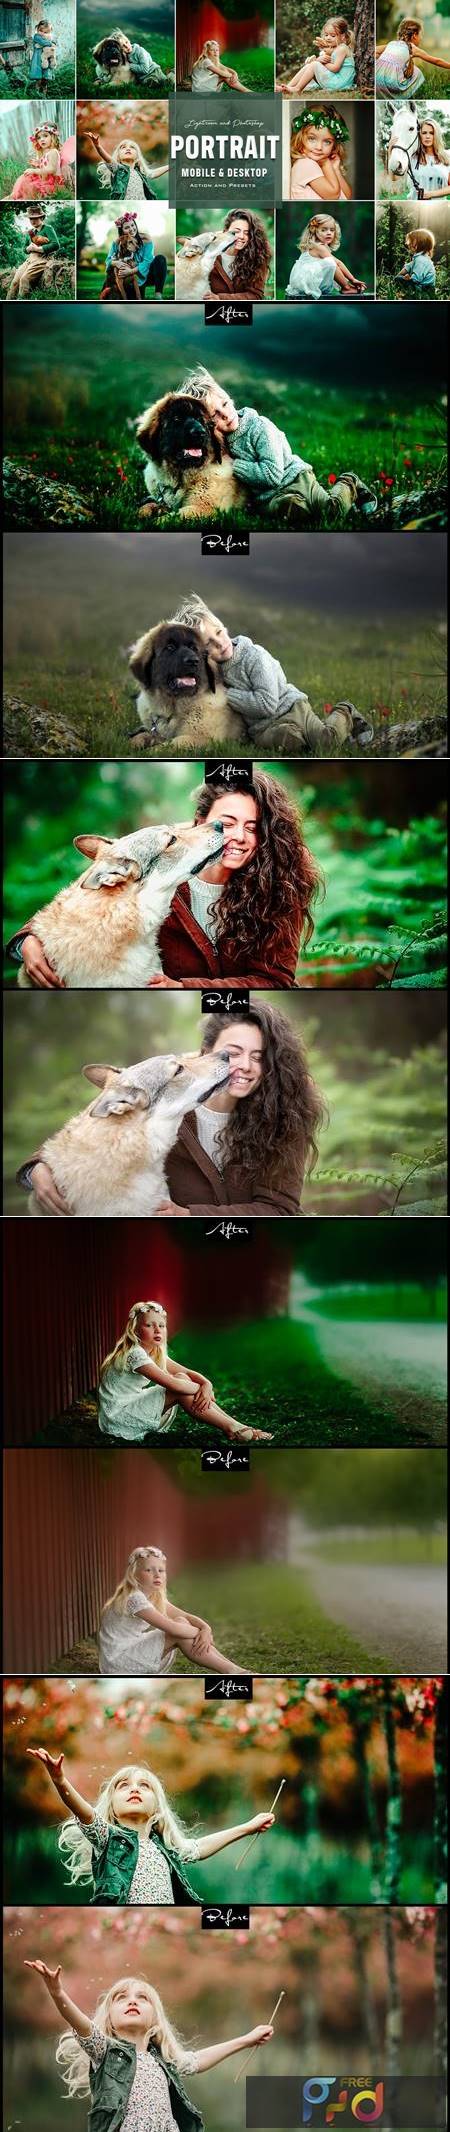 HDR Fashion - Photoshop Actions Lightroom Presets ZBL2HP3 1